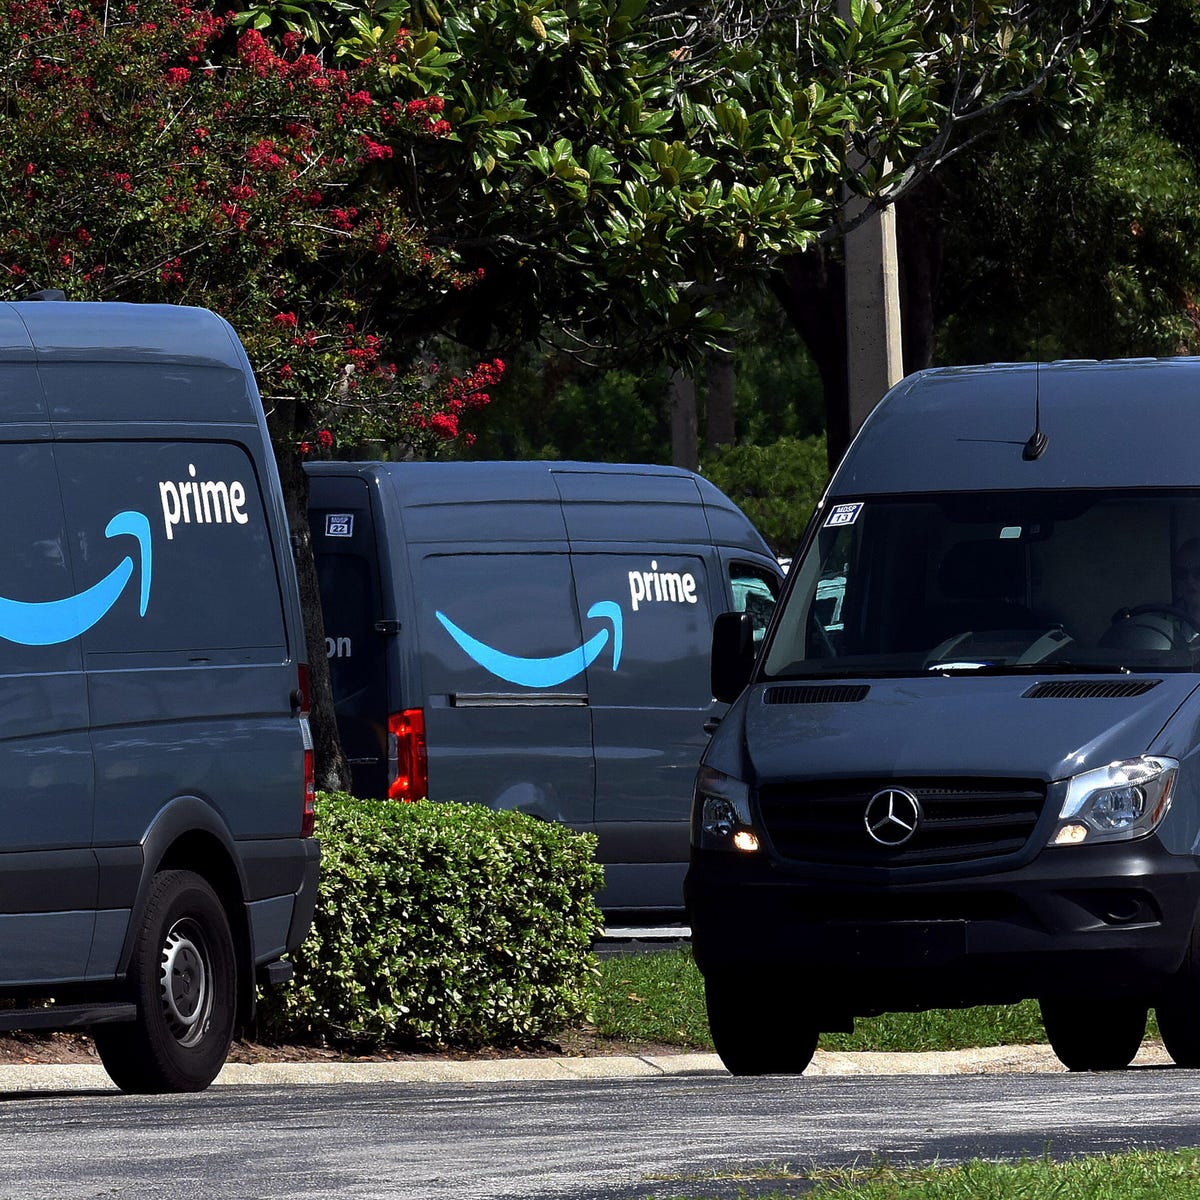 starts offering same-day deliveries that will arrive overnight - CNET